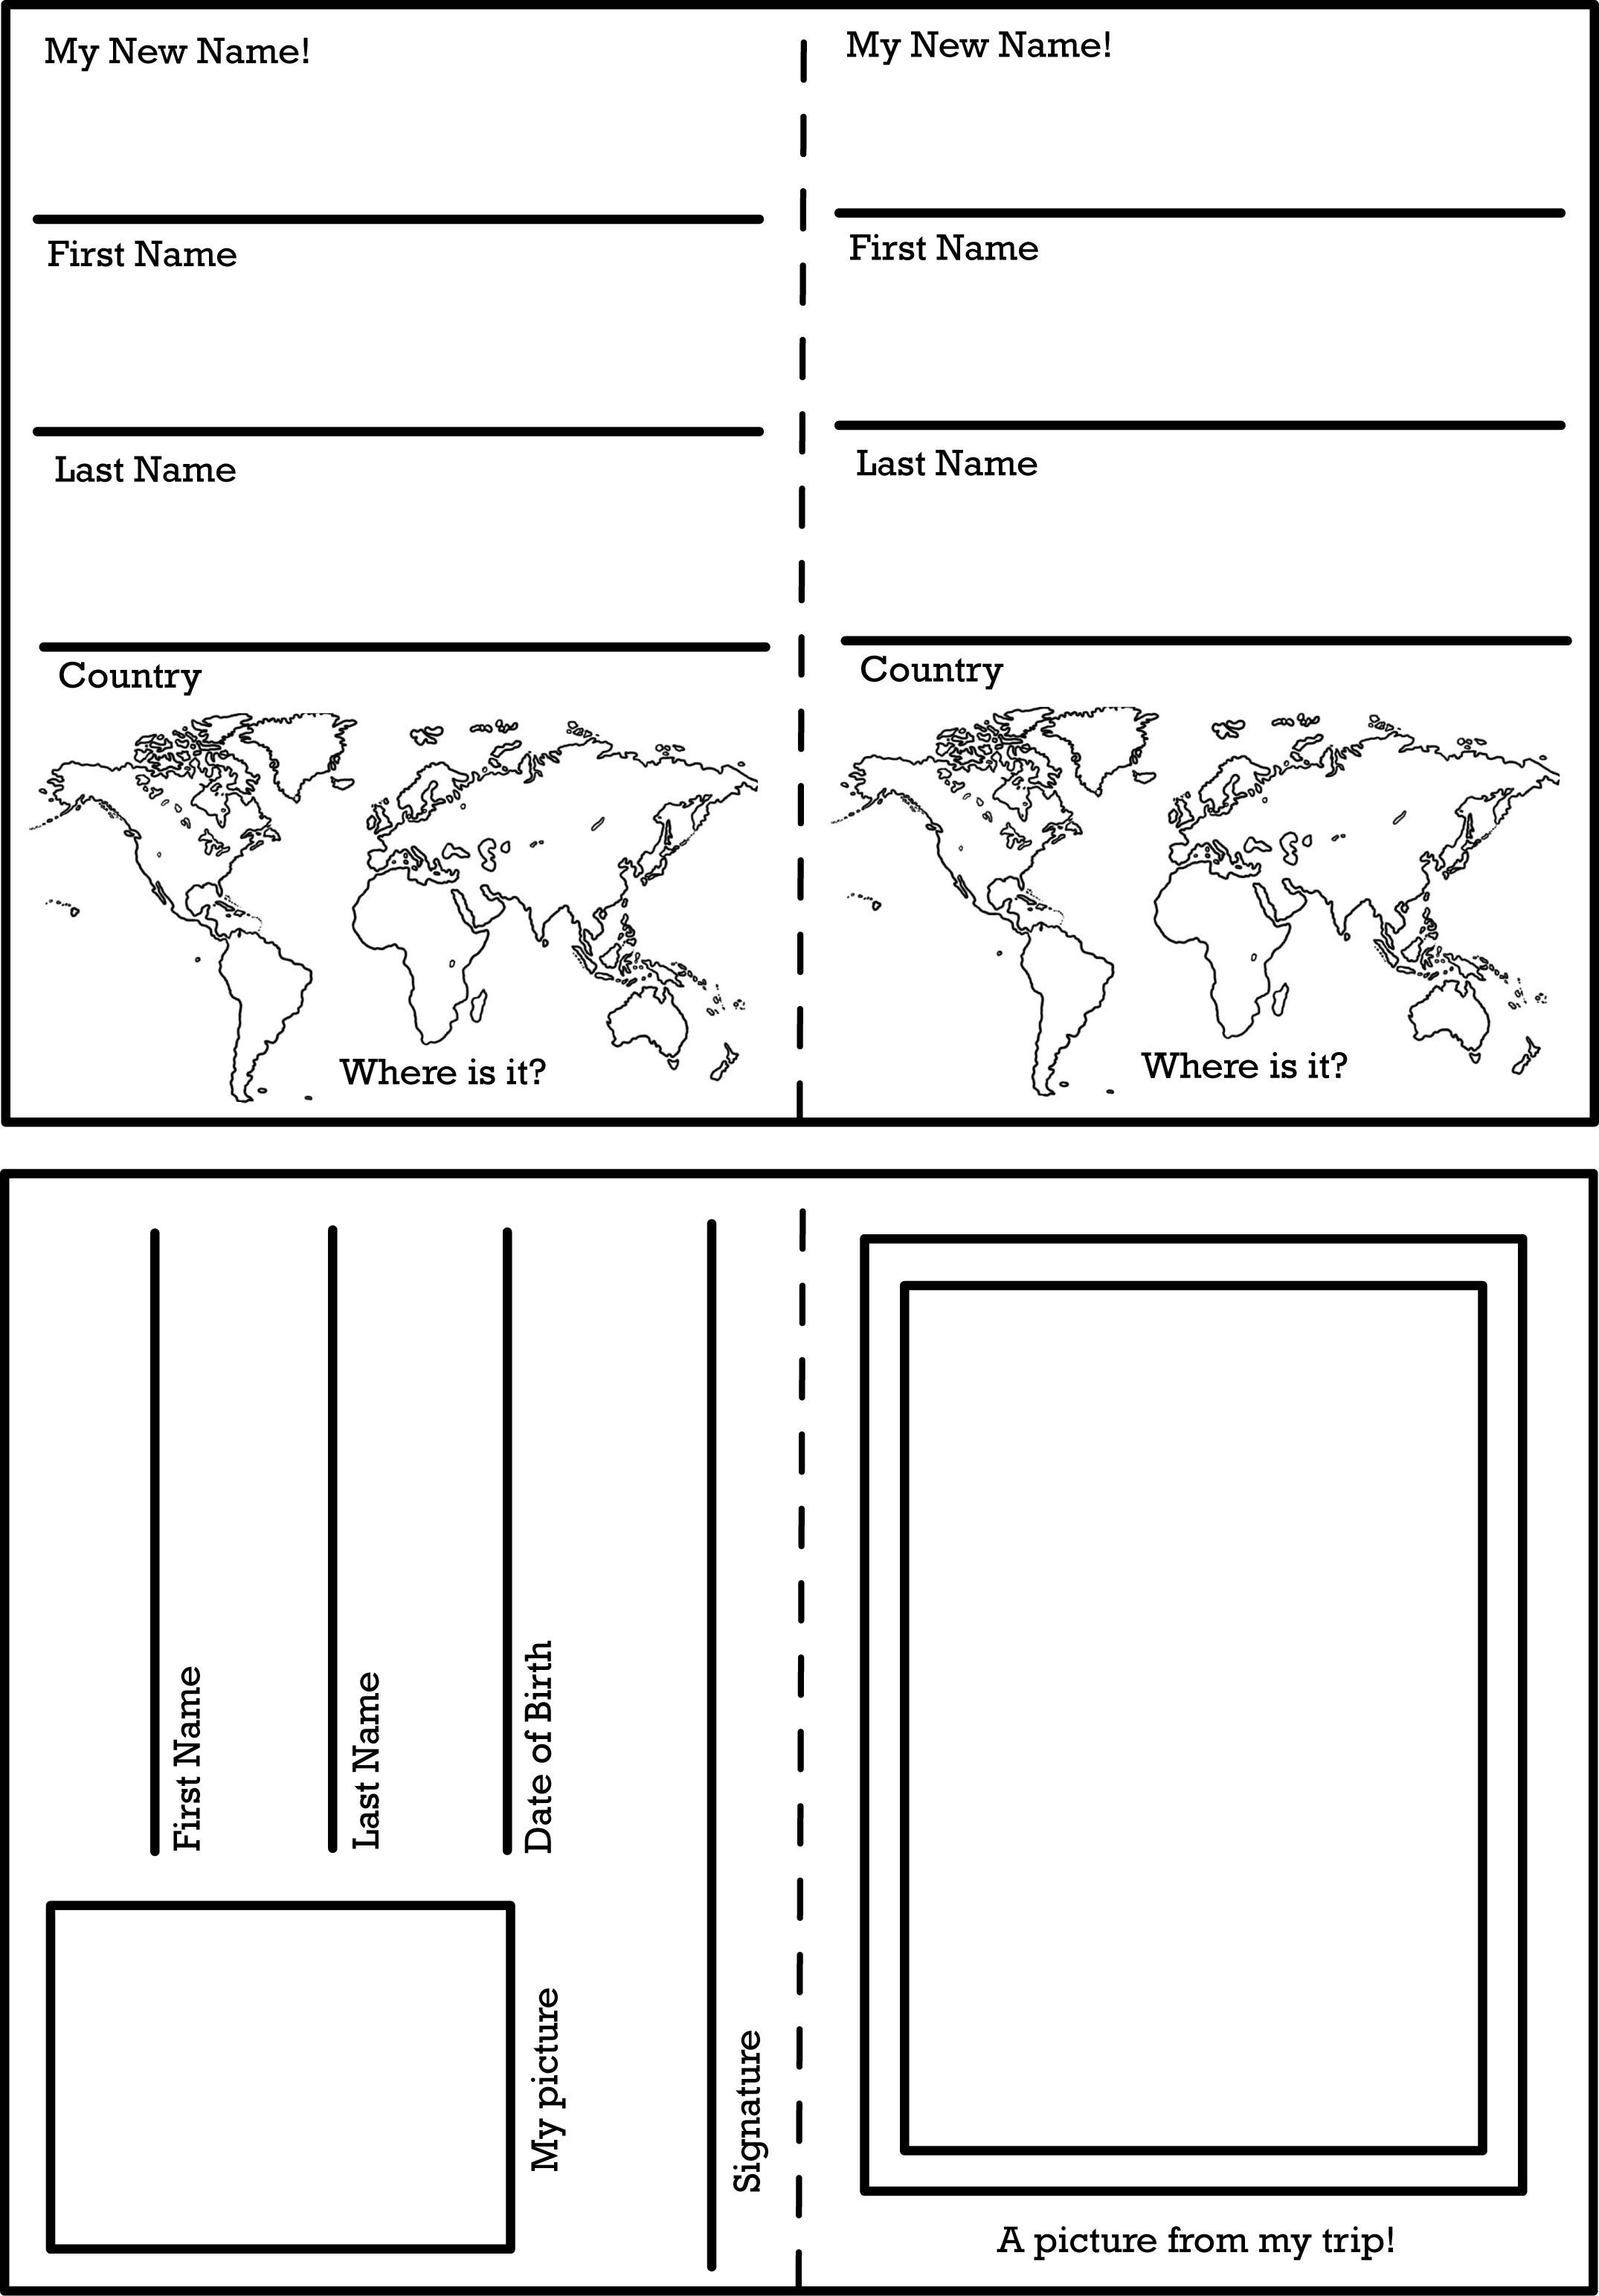 Activity Worksheets And Printables | The Change Your Name Store | Canada Food Guide Printable Worksheets